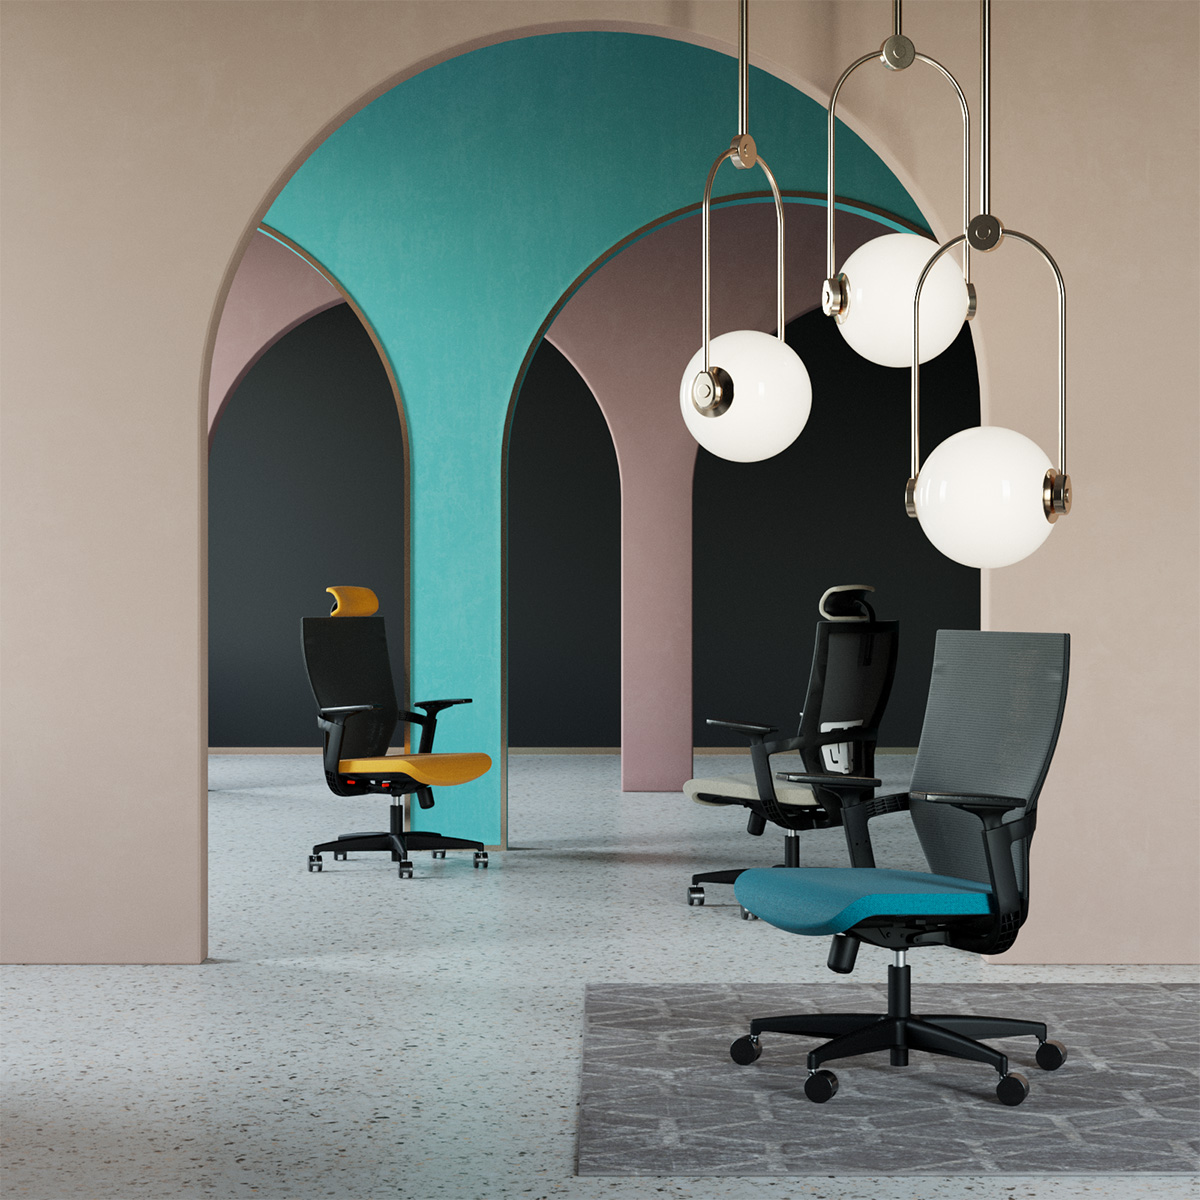 kaya chairs with curve opening walls